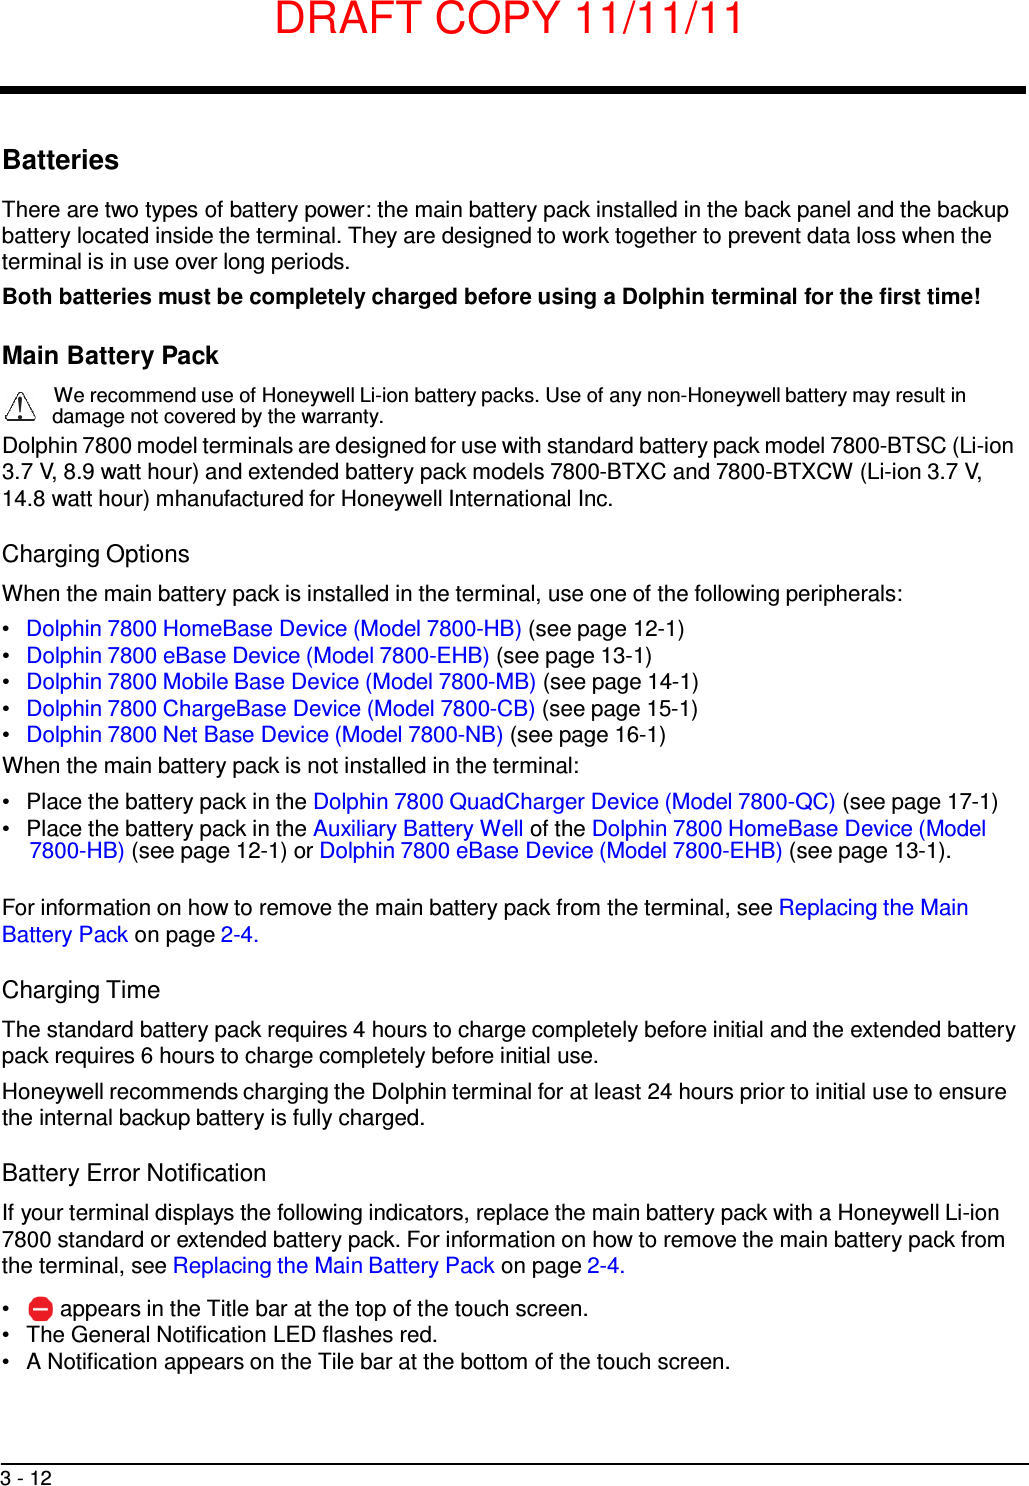 DRAFT COPY 11/11/11 3 - 12     Batteries  There are two types of battery power: the main battery pack installed in the back panel and the backup battery located inside the terminal. They are designed to work together to prevent data loss when the terminal is in use over long periods. Both batteries must be completely charged before using a Dolphin terminal for the first time!  Main Battery Pack  We recommend use of Honeywell Li-ion battery packs. Use of any non-Honeywell battery may result in !   damage not covered by the warranty. Dolphin 7800 model terminals are designed for use with standard battery pack model 7800-BTSC (Li-ion 3.7 V, 8.9 watt hour) and extended battery pack models 7800-BTXC and 7800-BTXCW (Li-ion 3.7 V, 14.8 watt hour) mhanufactured for Honeywell International Inc.  Charging Options  When the main battery pack is installed in the terminal, use one of the following peripherals: •   Dolphin 7800 HomeBase Device (Model 7800-HB) (see page 12-1) •   Dolphin 7800 eBase Device (Model 7800-EHB) (see page 13-1) •   Dolphin 7800 Mobile Base Device (Model 7800-MB) (see page 14-1) •   Dolphin 7800 ChargeBase Device (Model 7800-CB) (see page 15-1) •   Dolphin 7800 Net Base Device (Model 7800-NB) (see page 16-1) When the main battery pack is not installed in the terminal: •   Place the battery pack in the Dolphin 7800 QuadCharger Device (Model 7800-QC) (see page 17-1) •   Place the battery pack in the Auxiliary Battery Well of the Dolphin 7800 HomeBase Device (Model 7800-HB) (see page 12-1) or Dolphin 7800 eBase Device (Model 7800-EHB) (see page 13-1).   For information on how to remove the main battery pack from the terminal, see Replacing the Main Battery Pack on page 2-4.  Charging Time  The standard battery pack requires 4 hours to charge completely before initial and the extended battery pack requires 6 hours to charge completely before initial use. Honeywell recommends charging the Dolphin terminal for at least 24 hours prior to initial use to ensure the internal backup battery is fully charged.  Battery Error Notification  If your terminal displays the following indicators, replace the main battery pack with a Honeywell Li-ion 7800 standard or extended battery pack. For information on how to remove the main battery pack from the terminal, see Replacing the Main Battery Pack on page 2-4.  •  appears in the Title bar at the top of the touch screen. •   The General Notification LED flashes red. •   A Notification appears on the Tile bar at the bottom of the touch screen. 